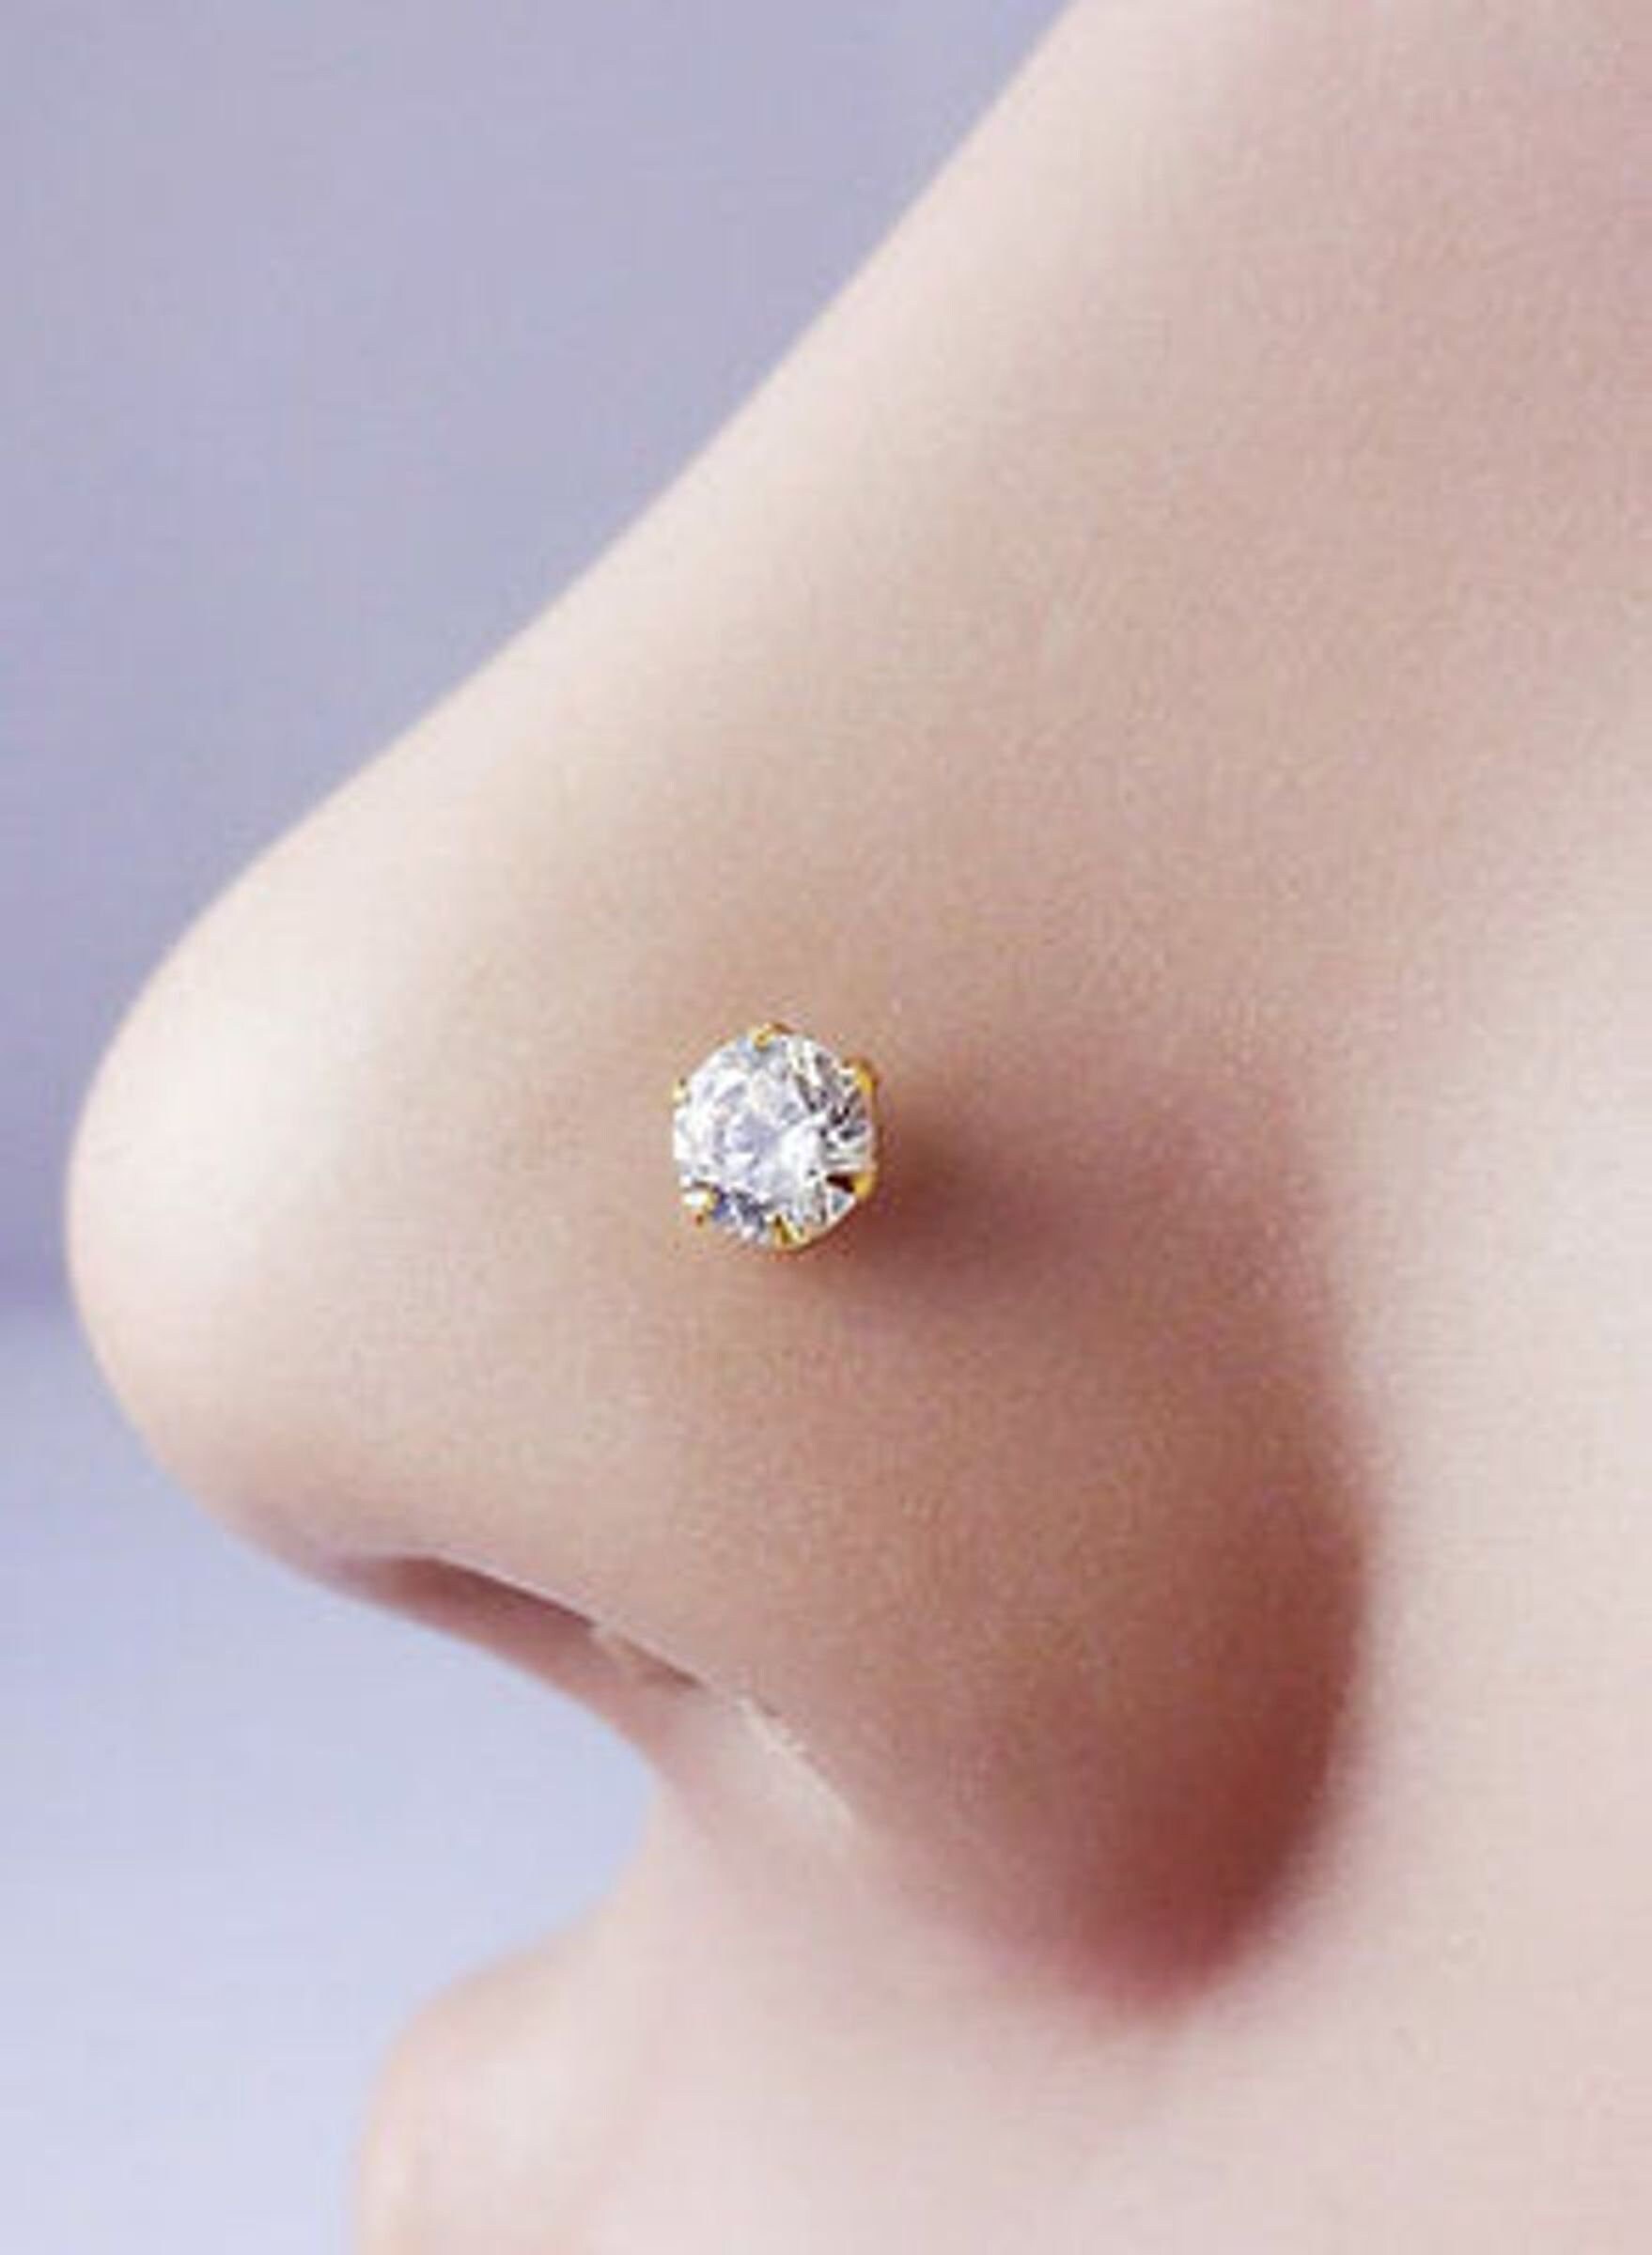 Indian Nose Ring Nose Piercing Brass Nose Jewelry Crystal Stone Christmas Gift 